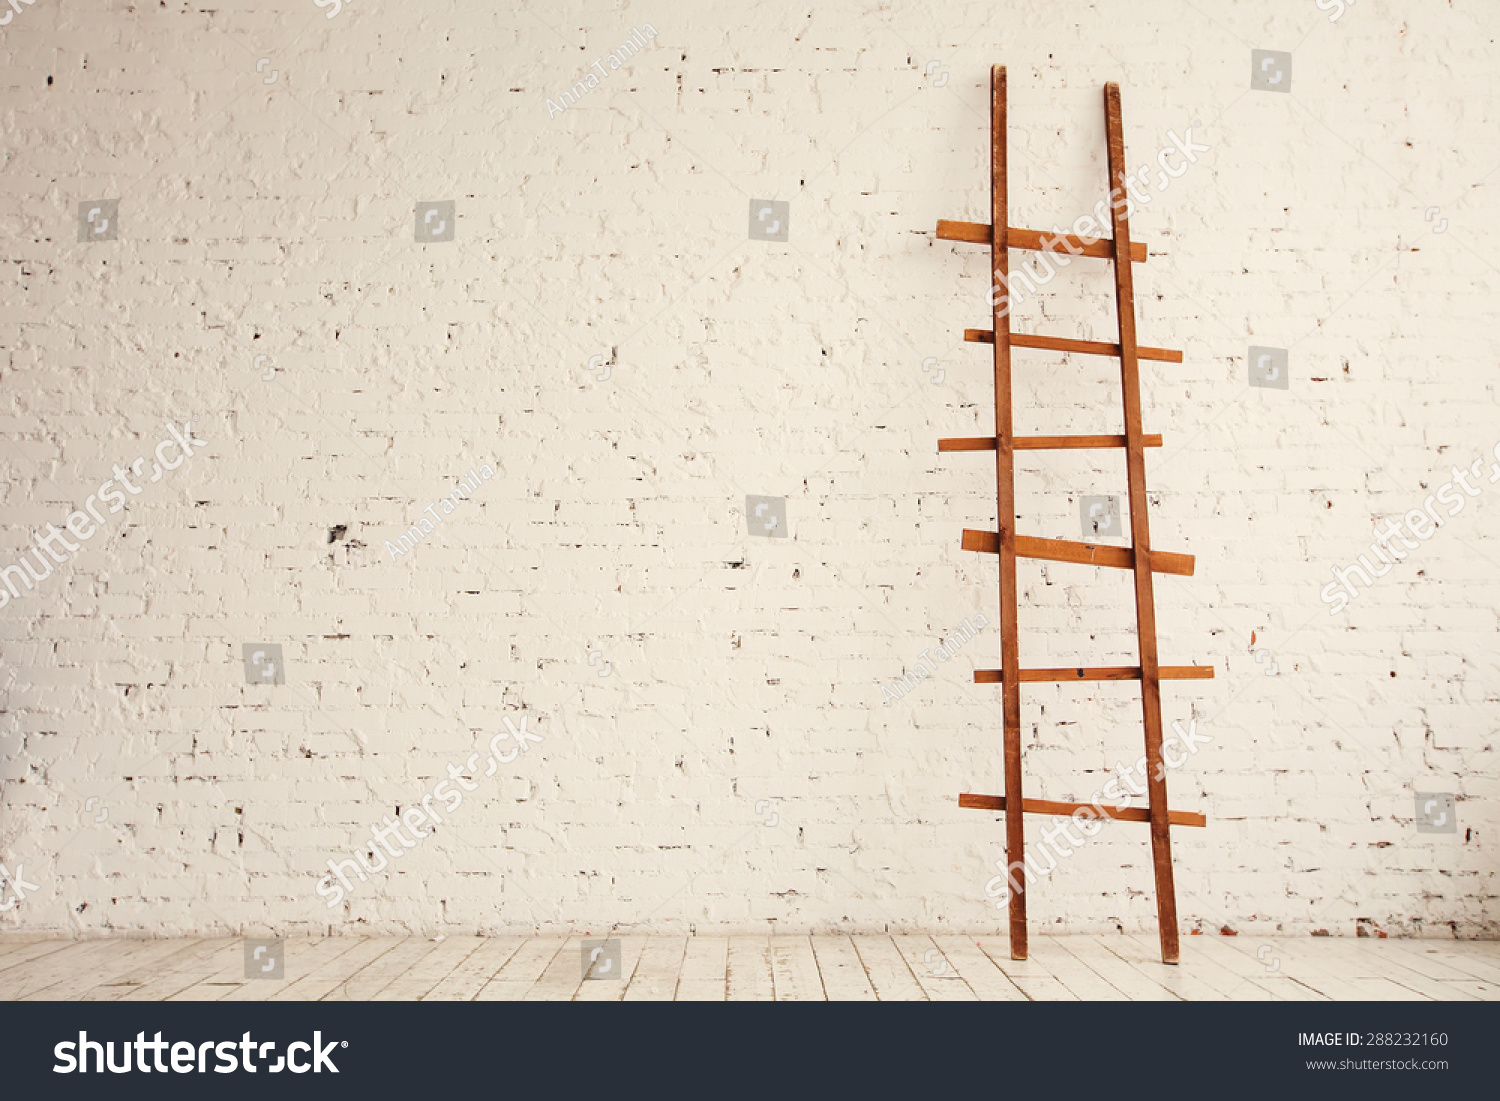 Wooden Ladder Near White Brick Wall In Empty Room Ready For Renovation